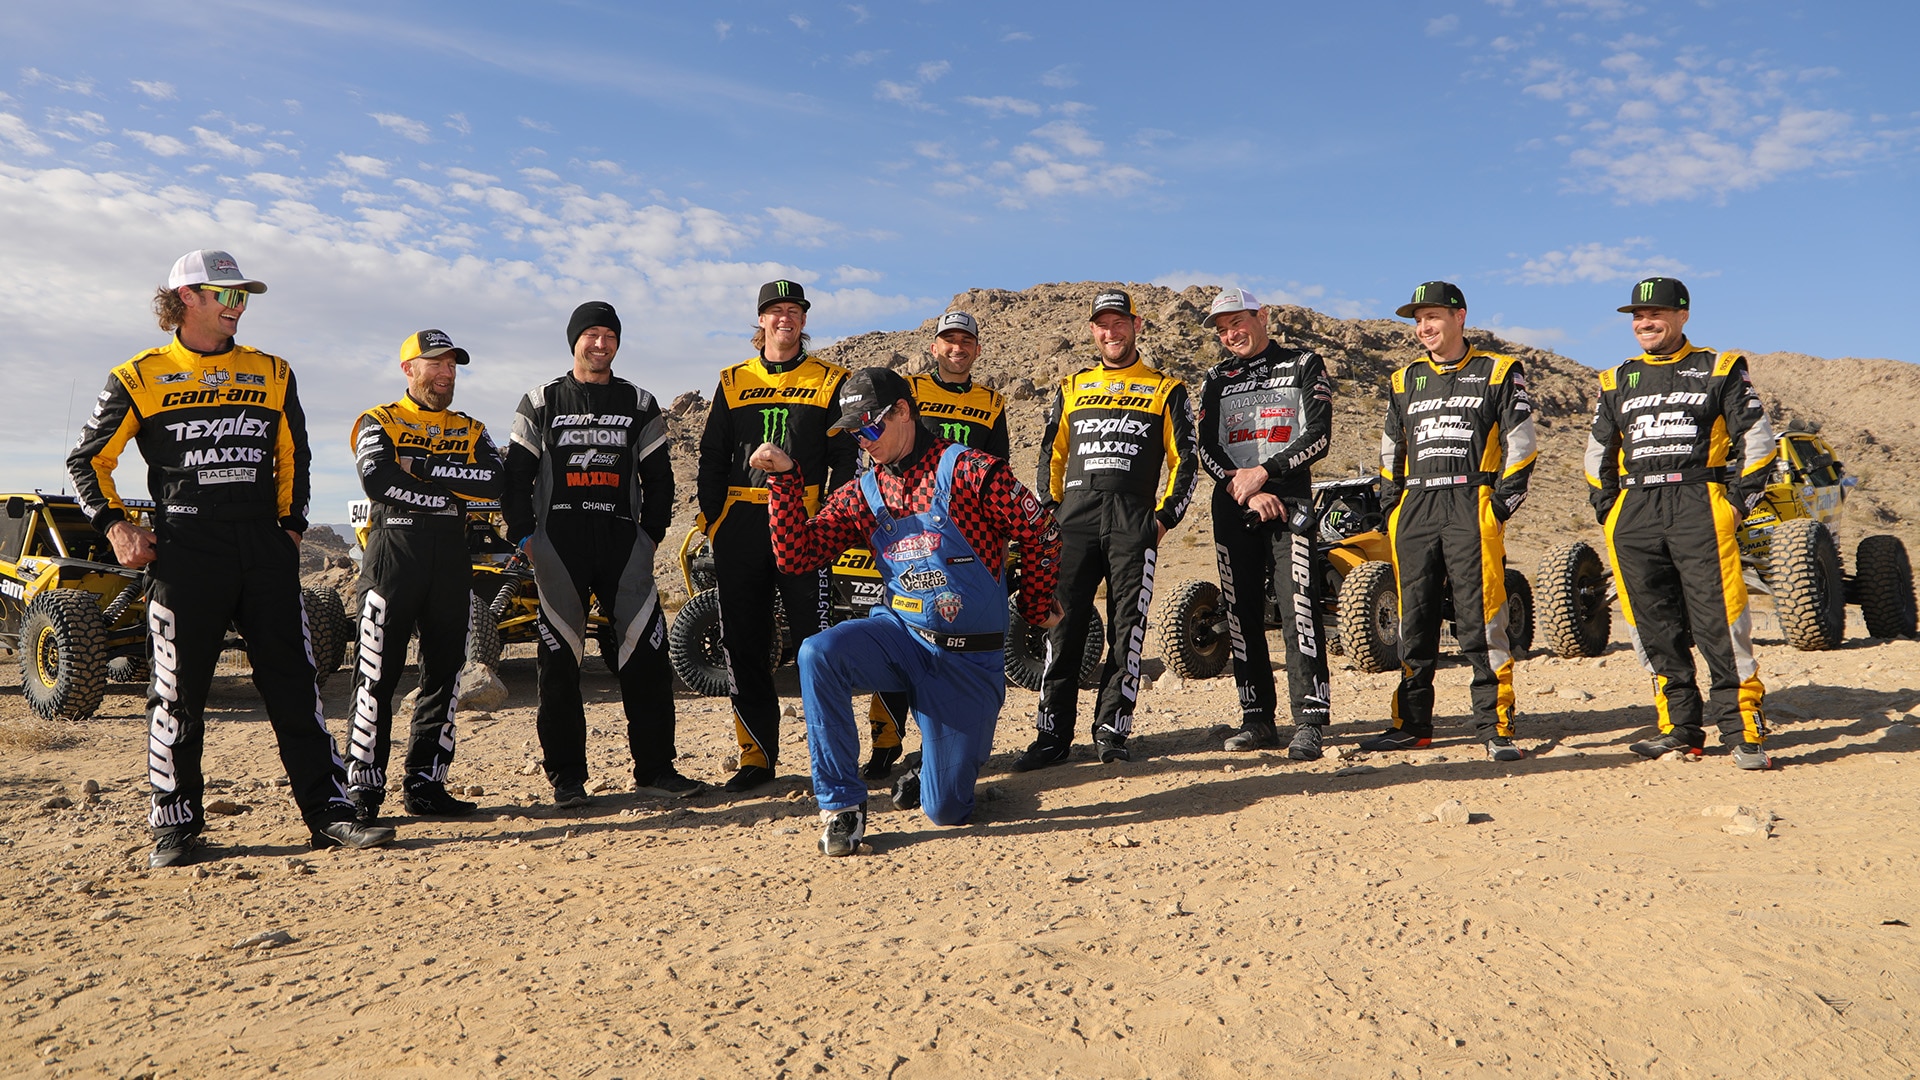 Group photo of Can-Am Off-Road ambassadors